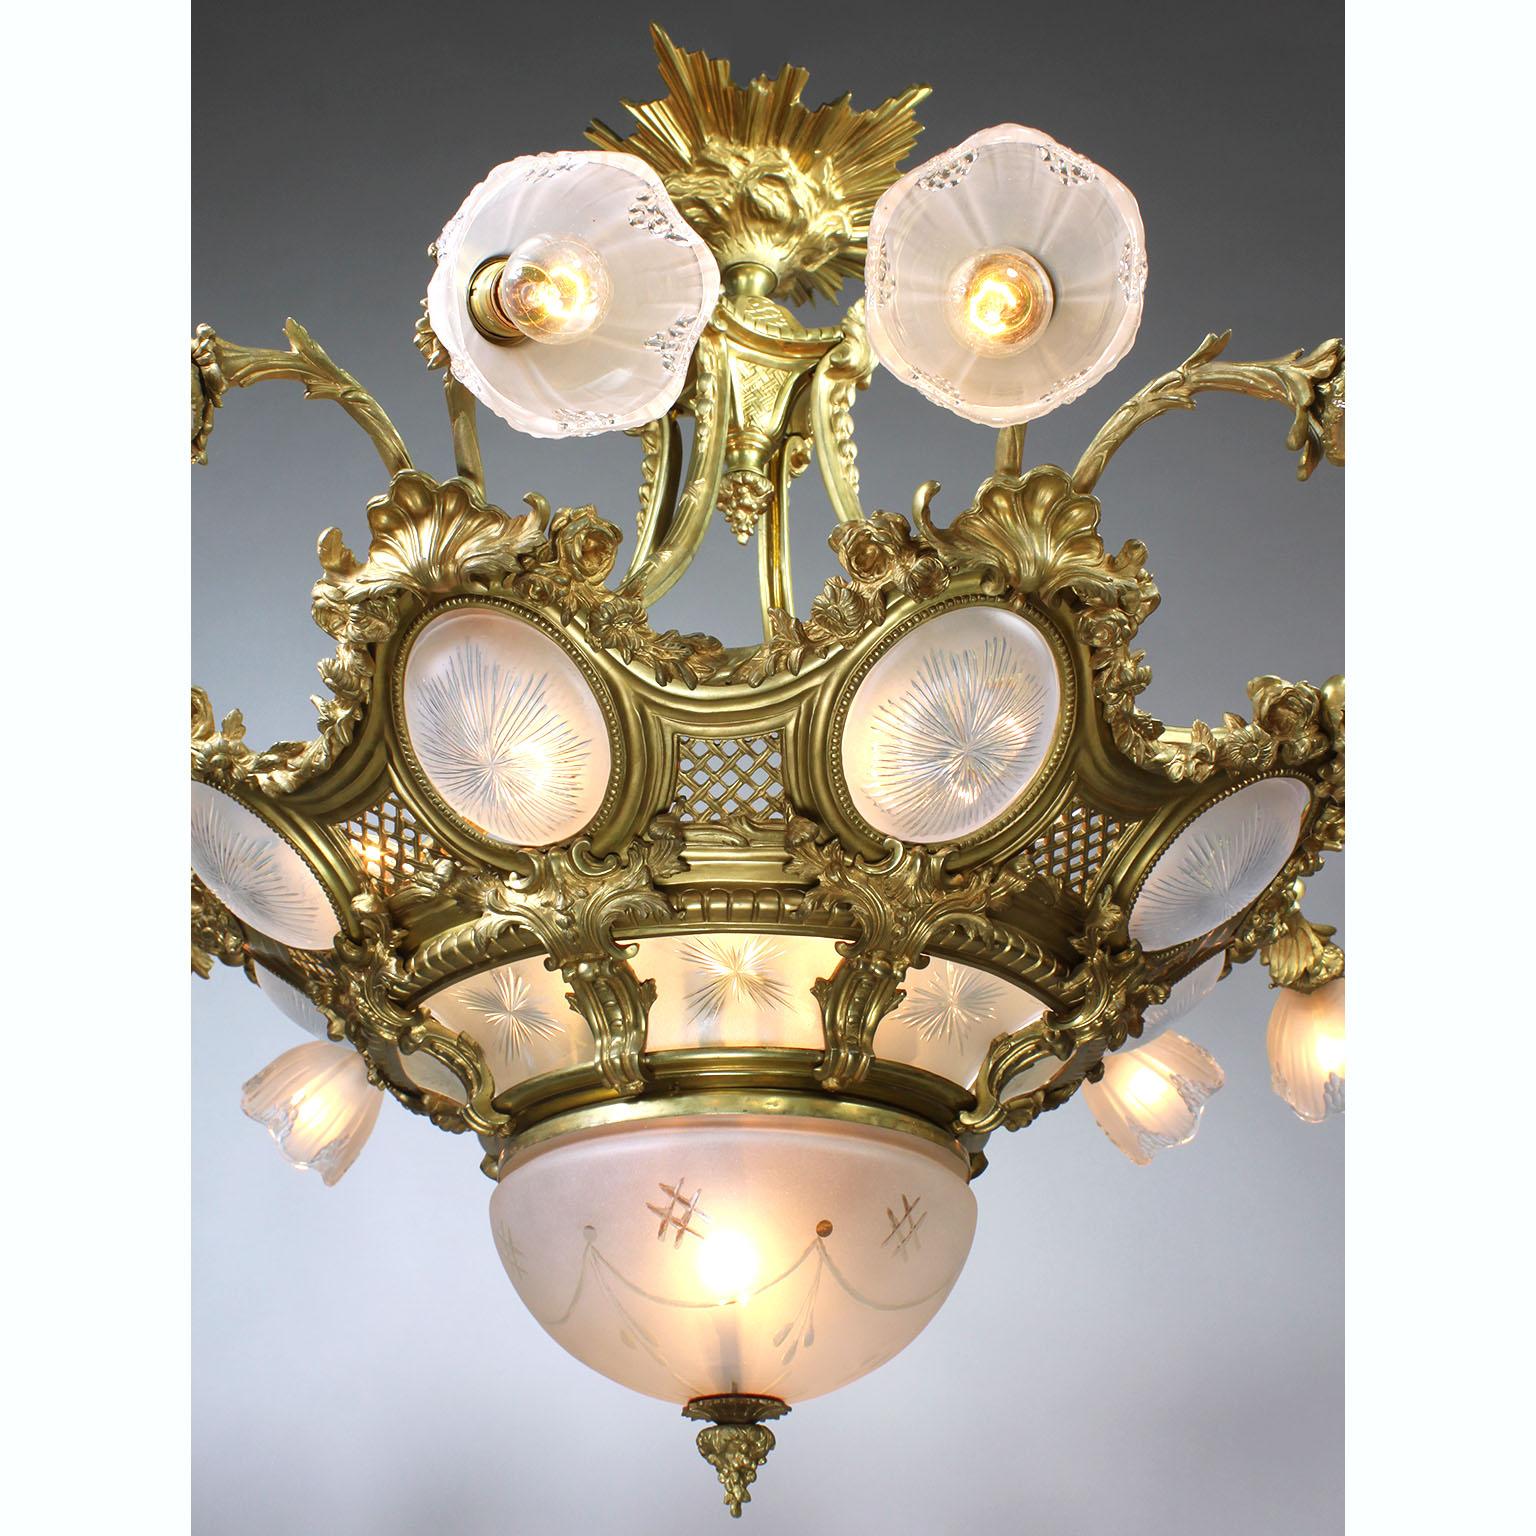 French Belle Époque Gilt-Bronze & Molded Glass 16 Light Plafonnier Chandelier In Good Condition For Sale In Los Angeles, CA